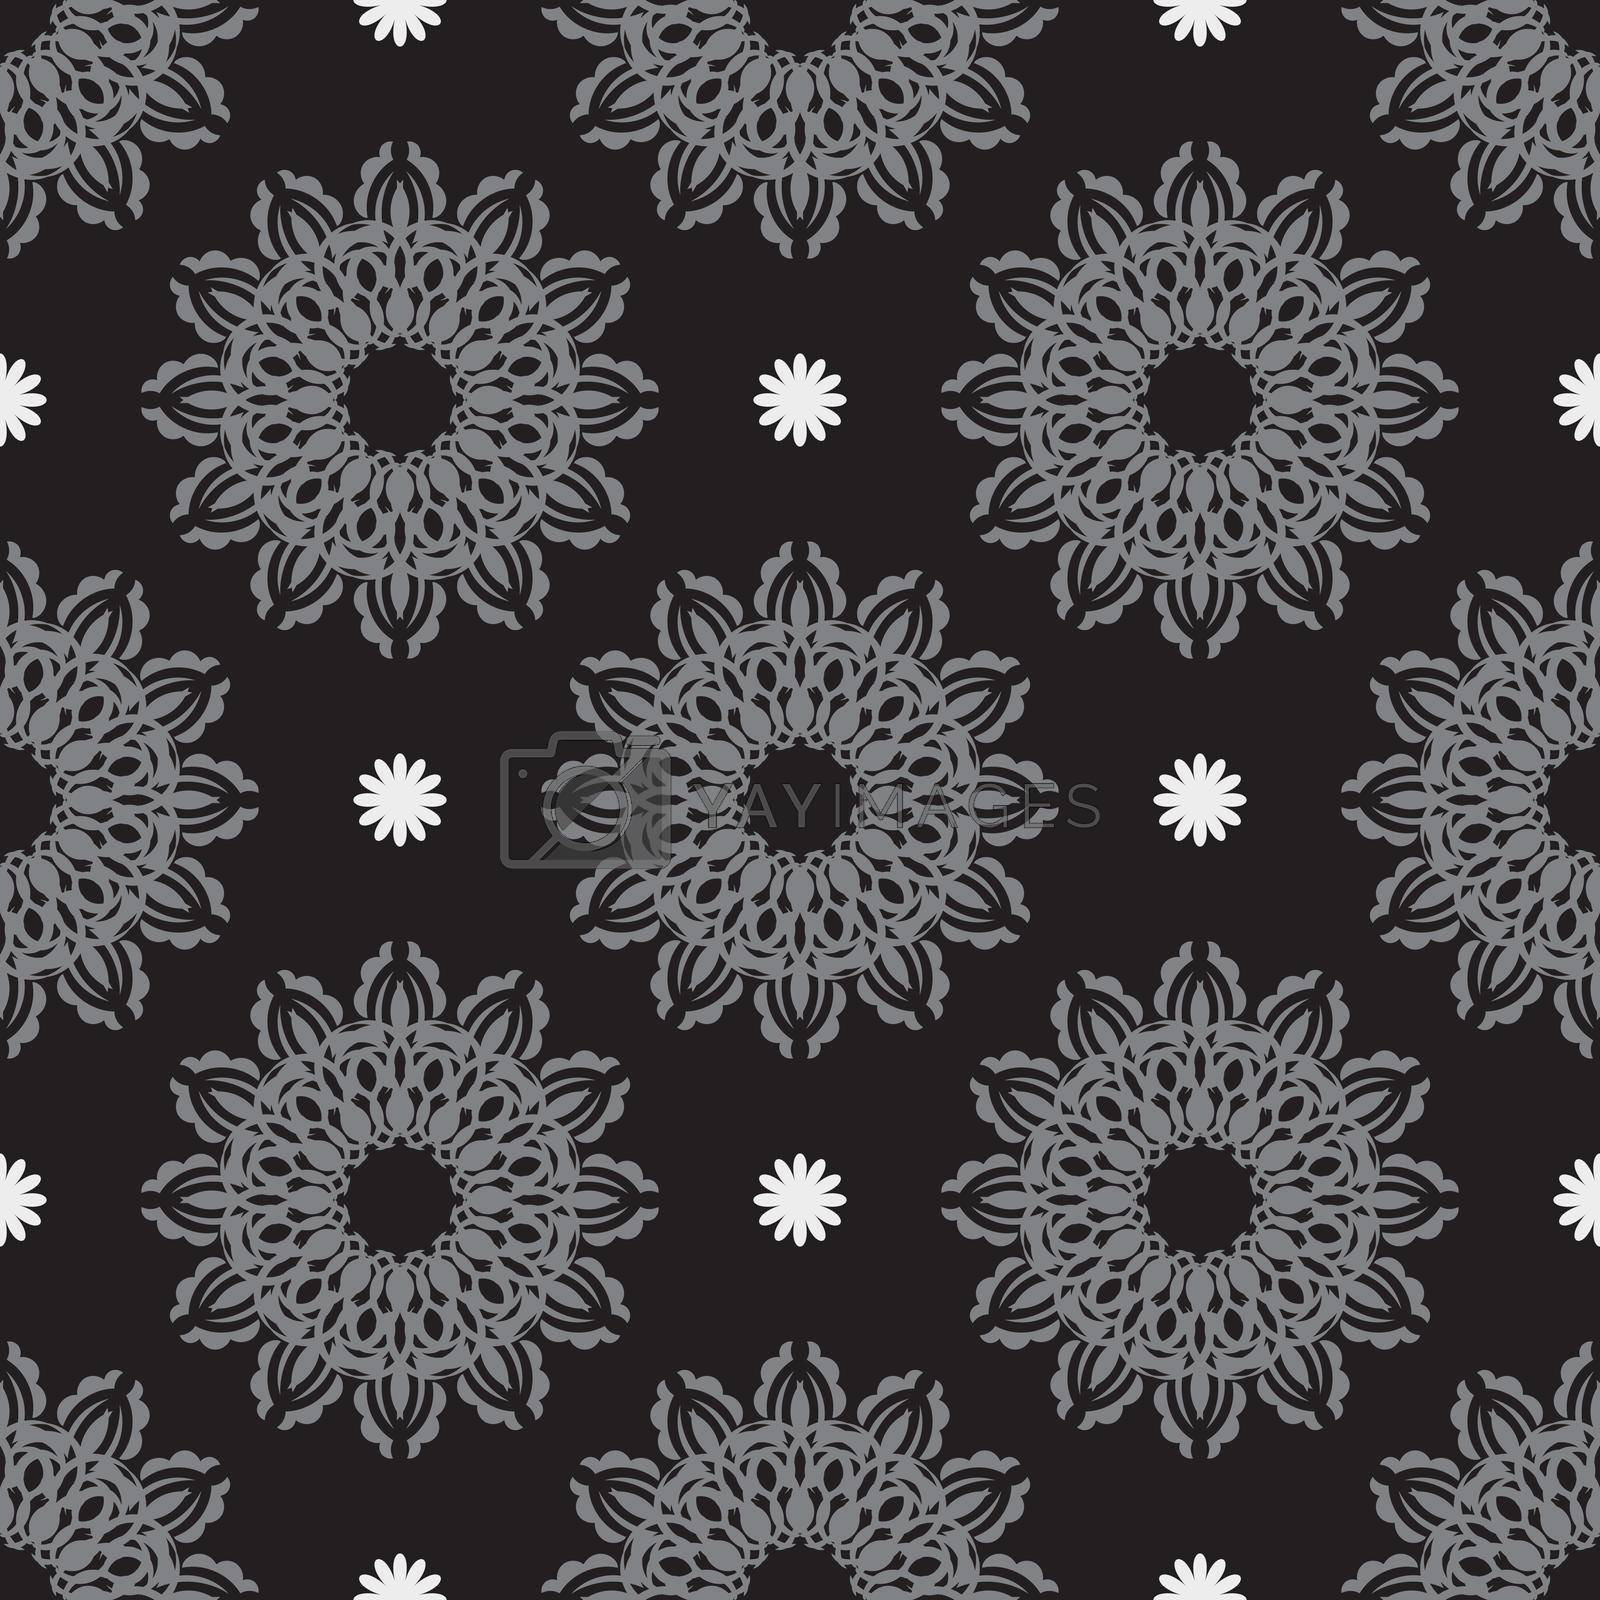 Black-gray seamless pattern with decorative ornaments. Good for clothing, textiles, backgrounds and prints. Vector illustration.